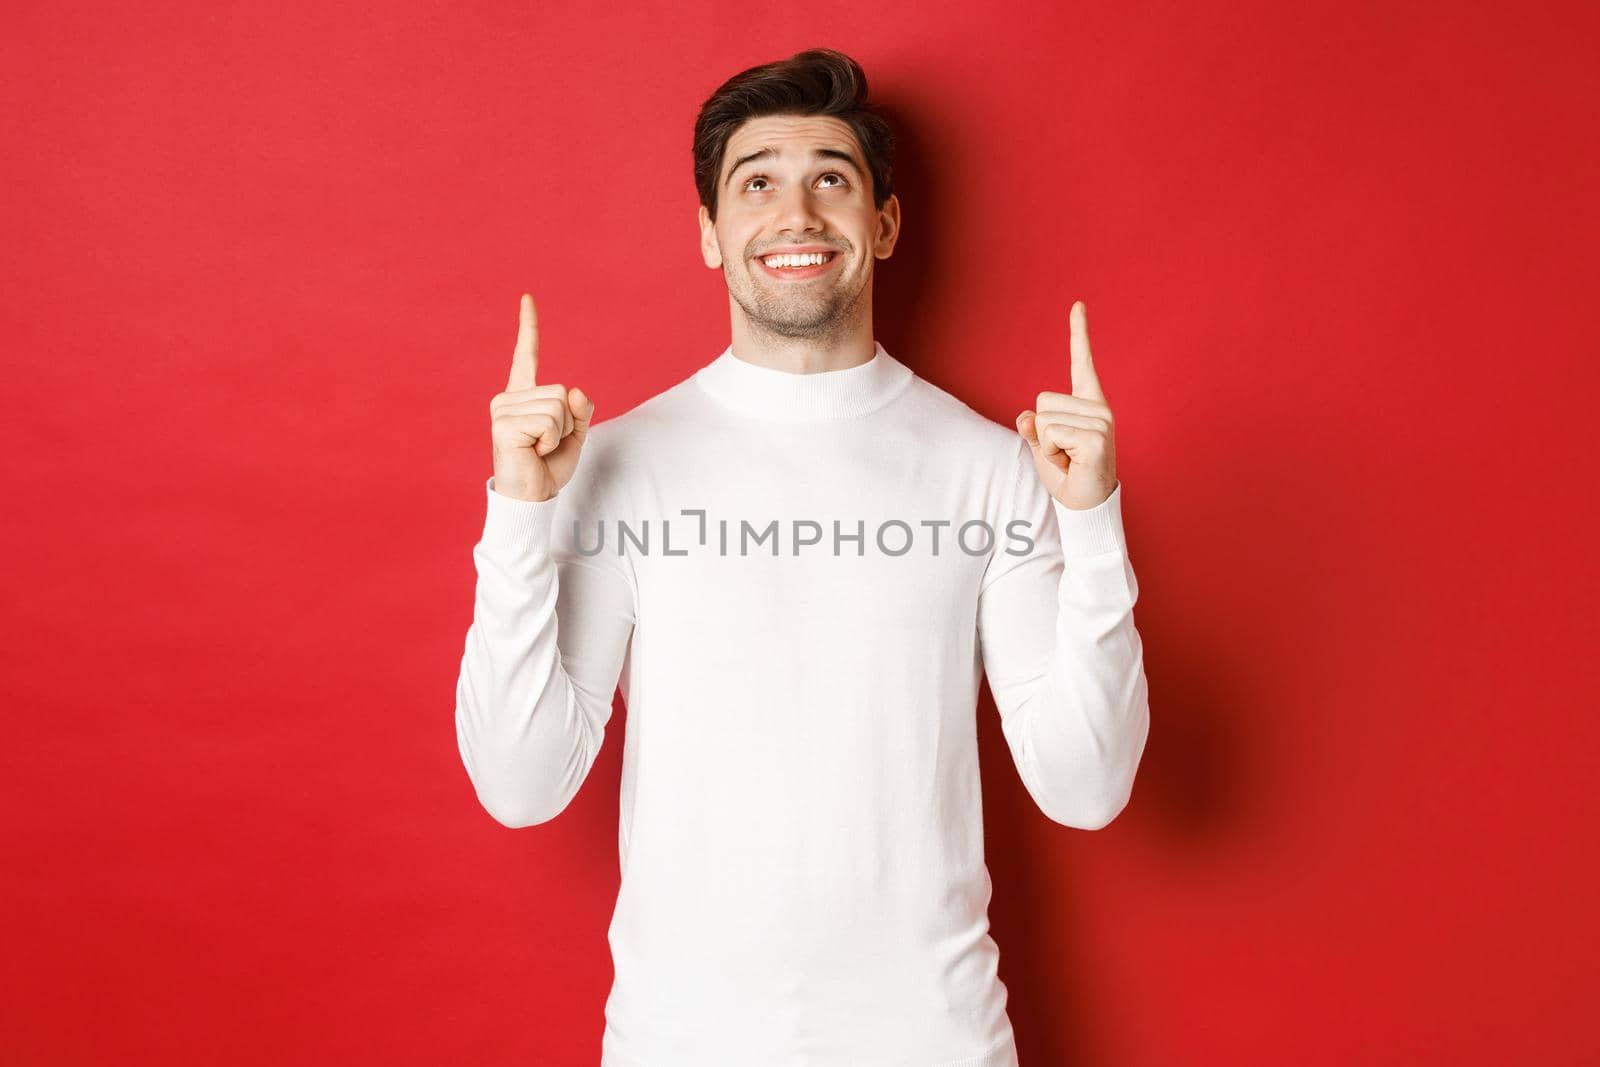 Concept of winter holidays. Image of happy attractive man in white sweater, smiling while pointing and looking up at copy space on red background.